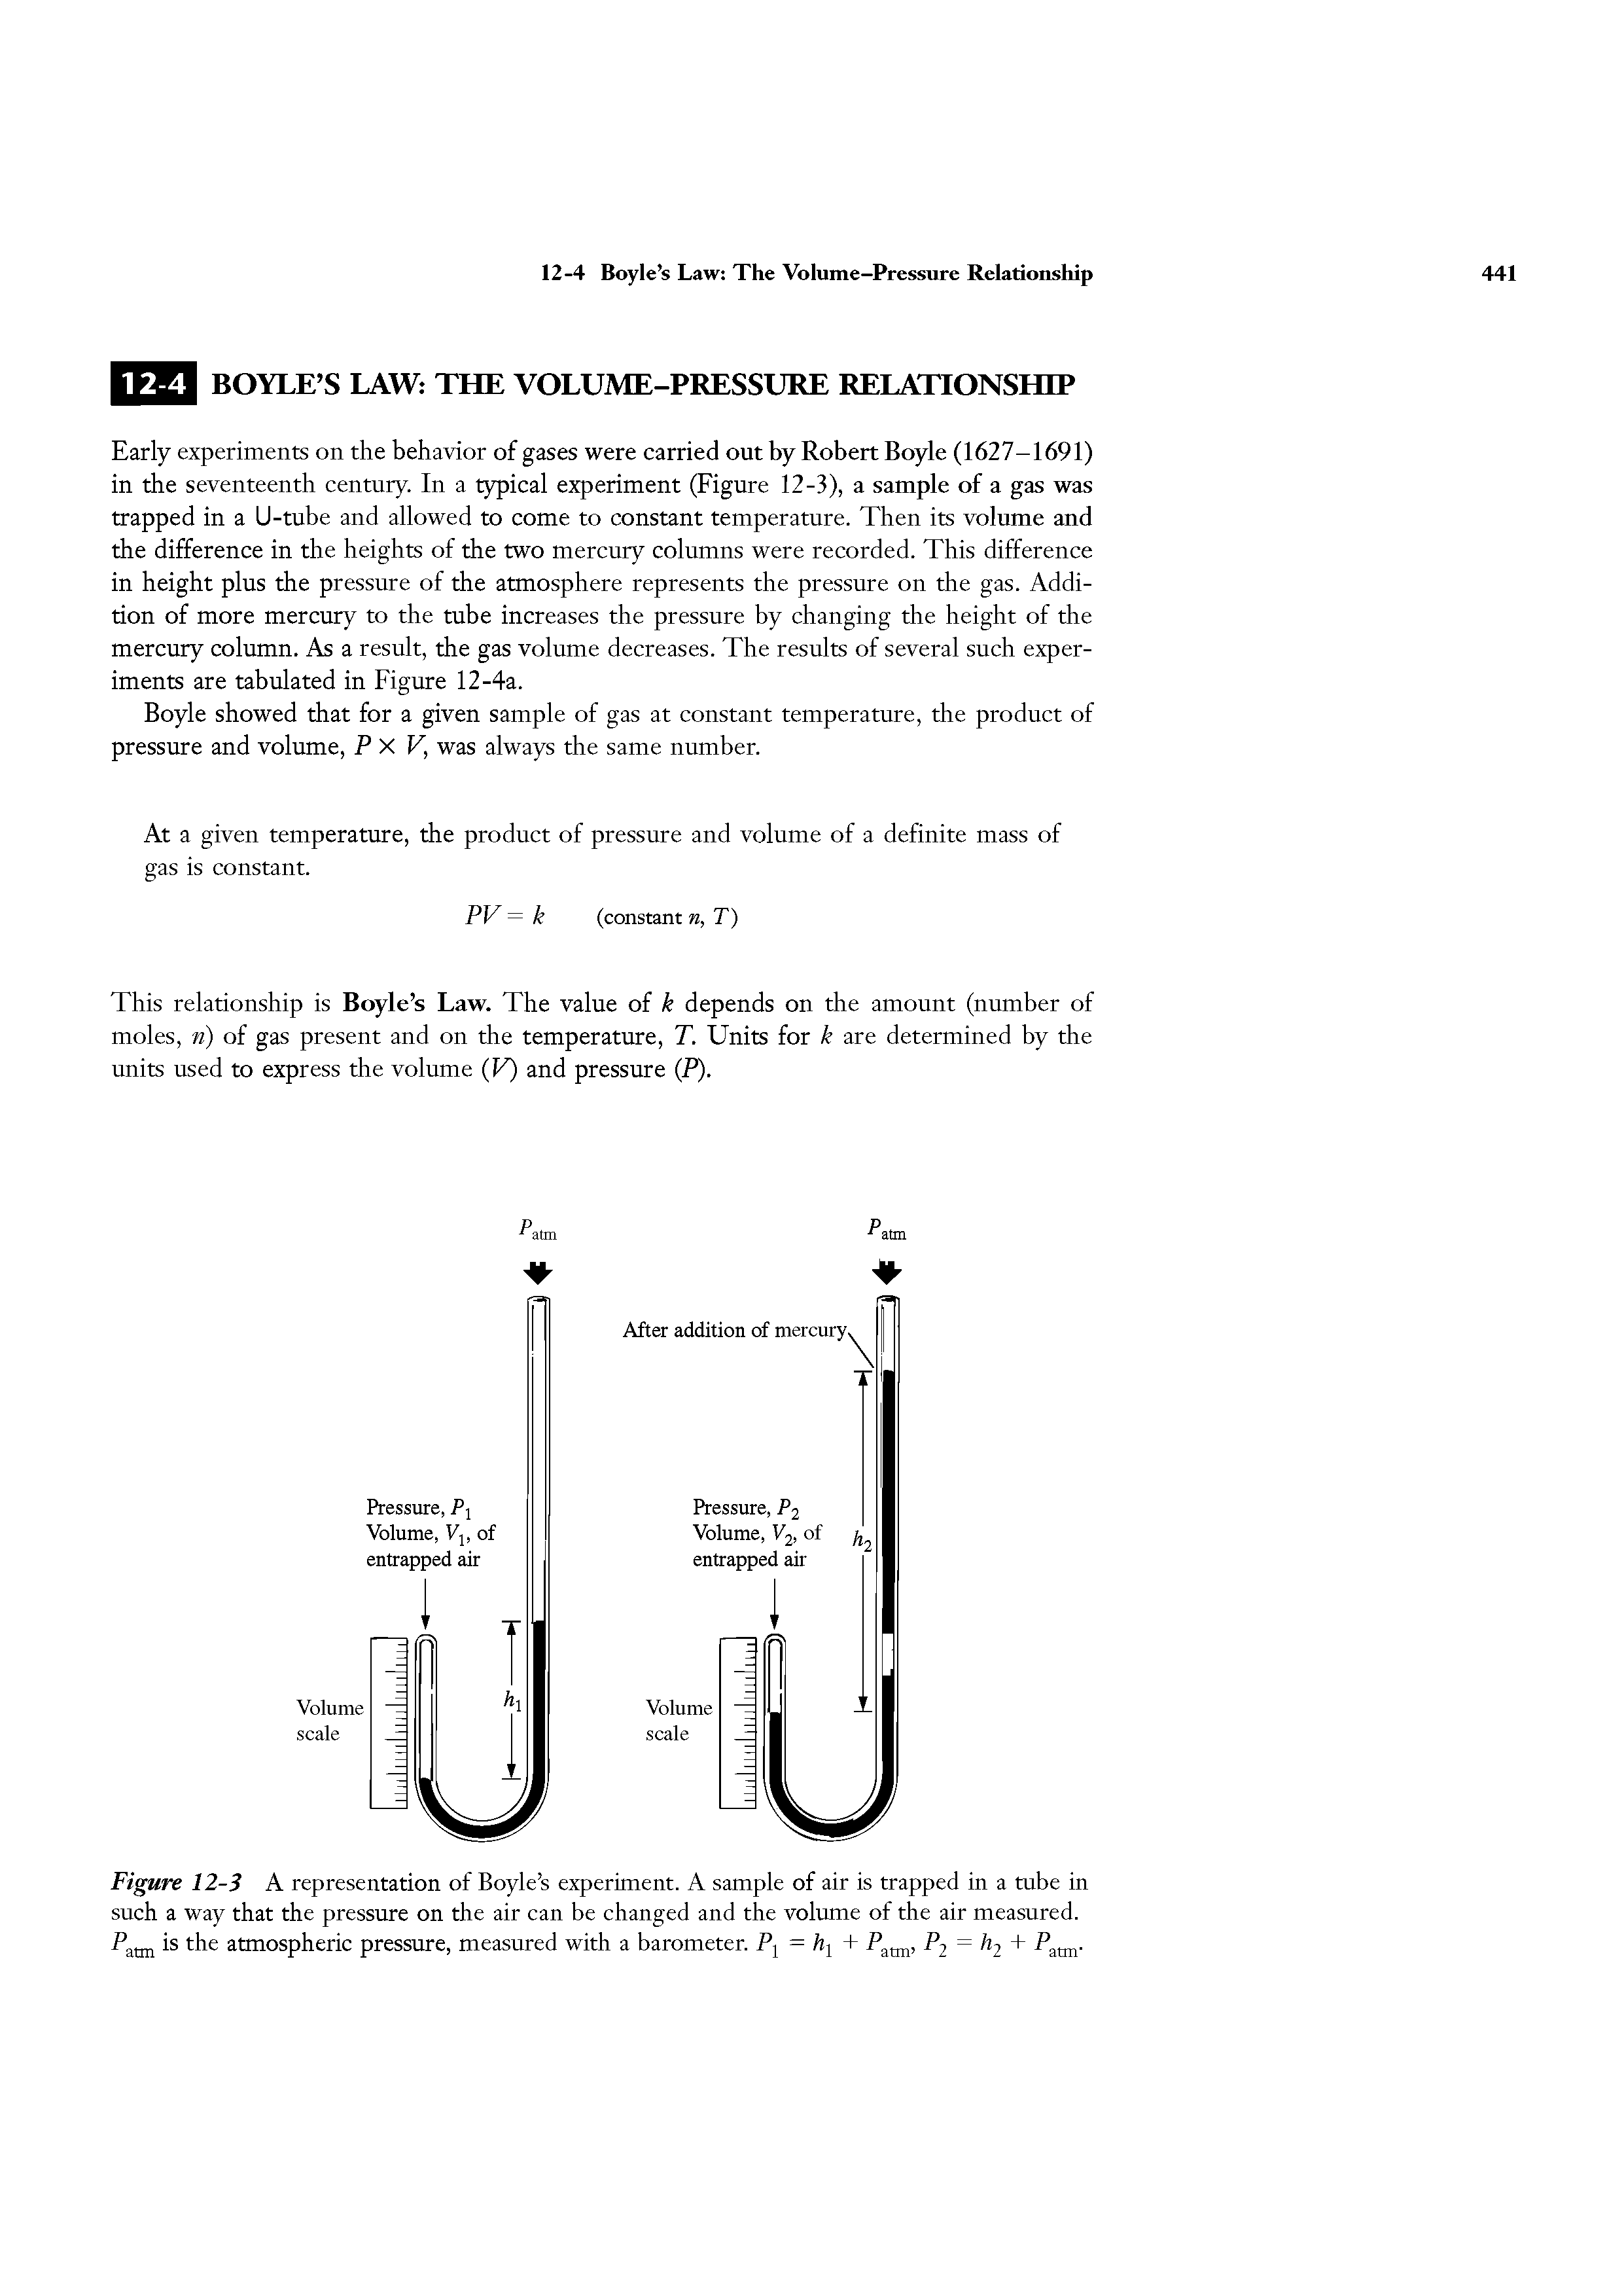 Figure 12-3 A representation of Boyle s experiment. A sample of air is trapped in a tube in such a way that the pressure on the air can be changed and the volume of the air measured, is the atmospheric pressure, measured with a barometer. P = + P, Pj 2 atm-...